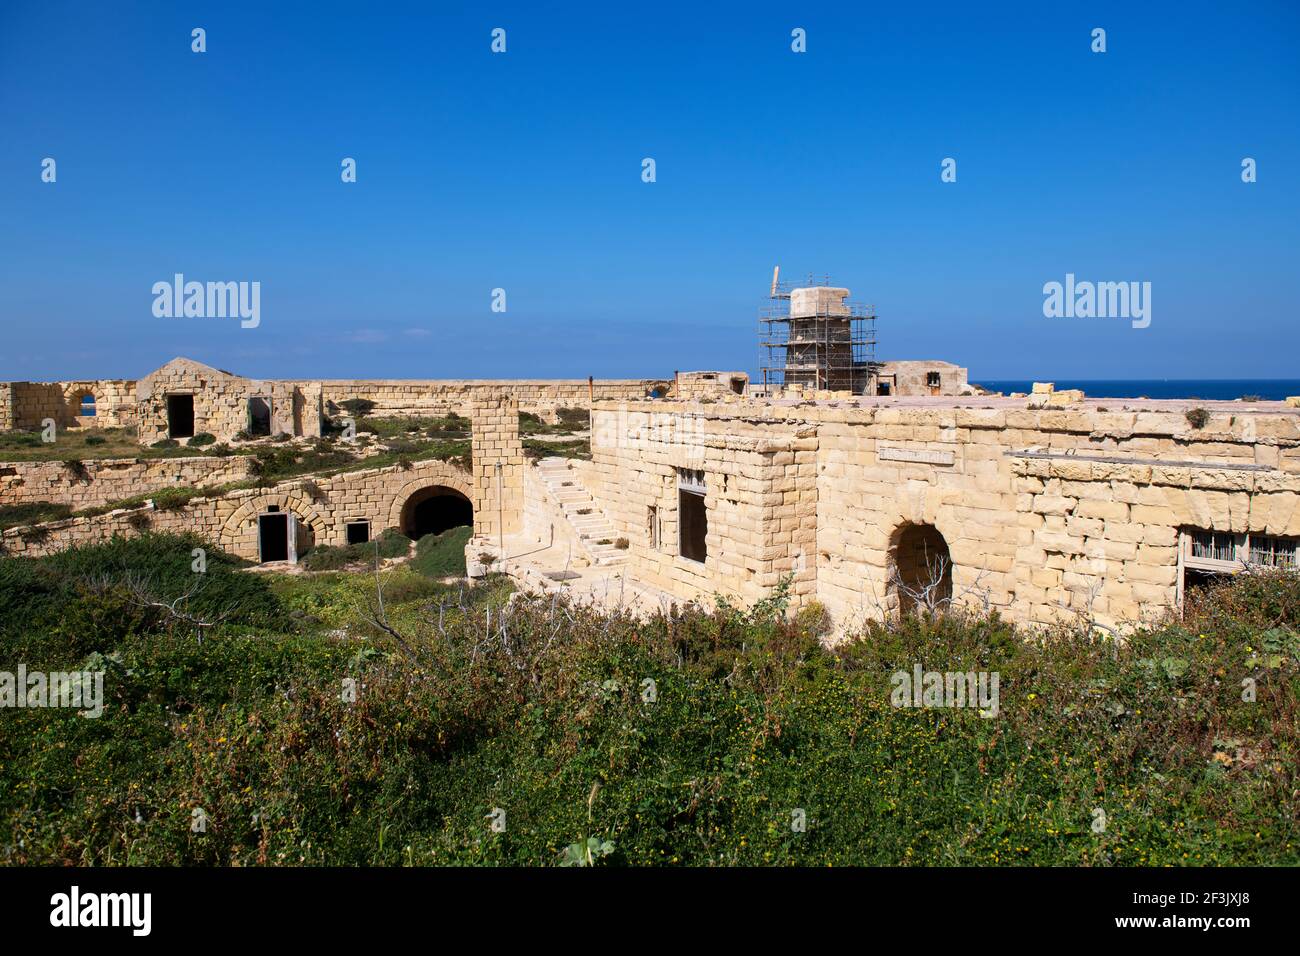 Fragment photos and ruins of Fort Ricasoli which was built by the Order of Saint John between 1670 and 1698,situated in Kalkara, Malta. It is the larg Stock Photo